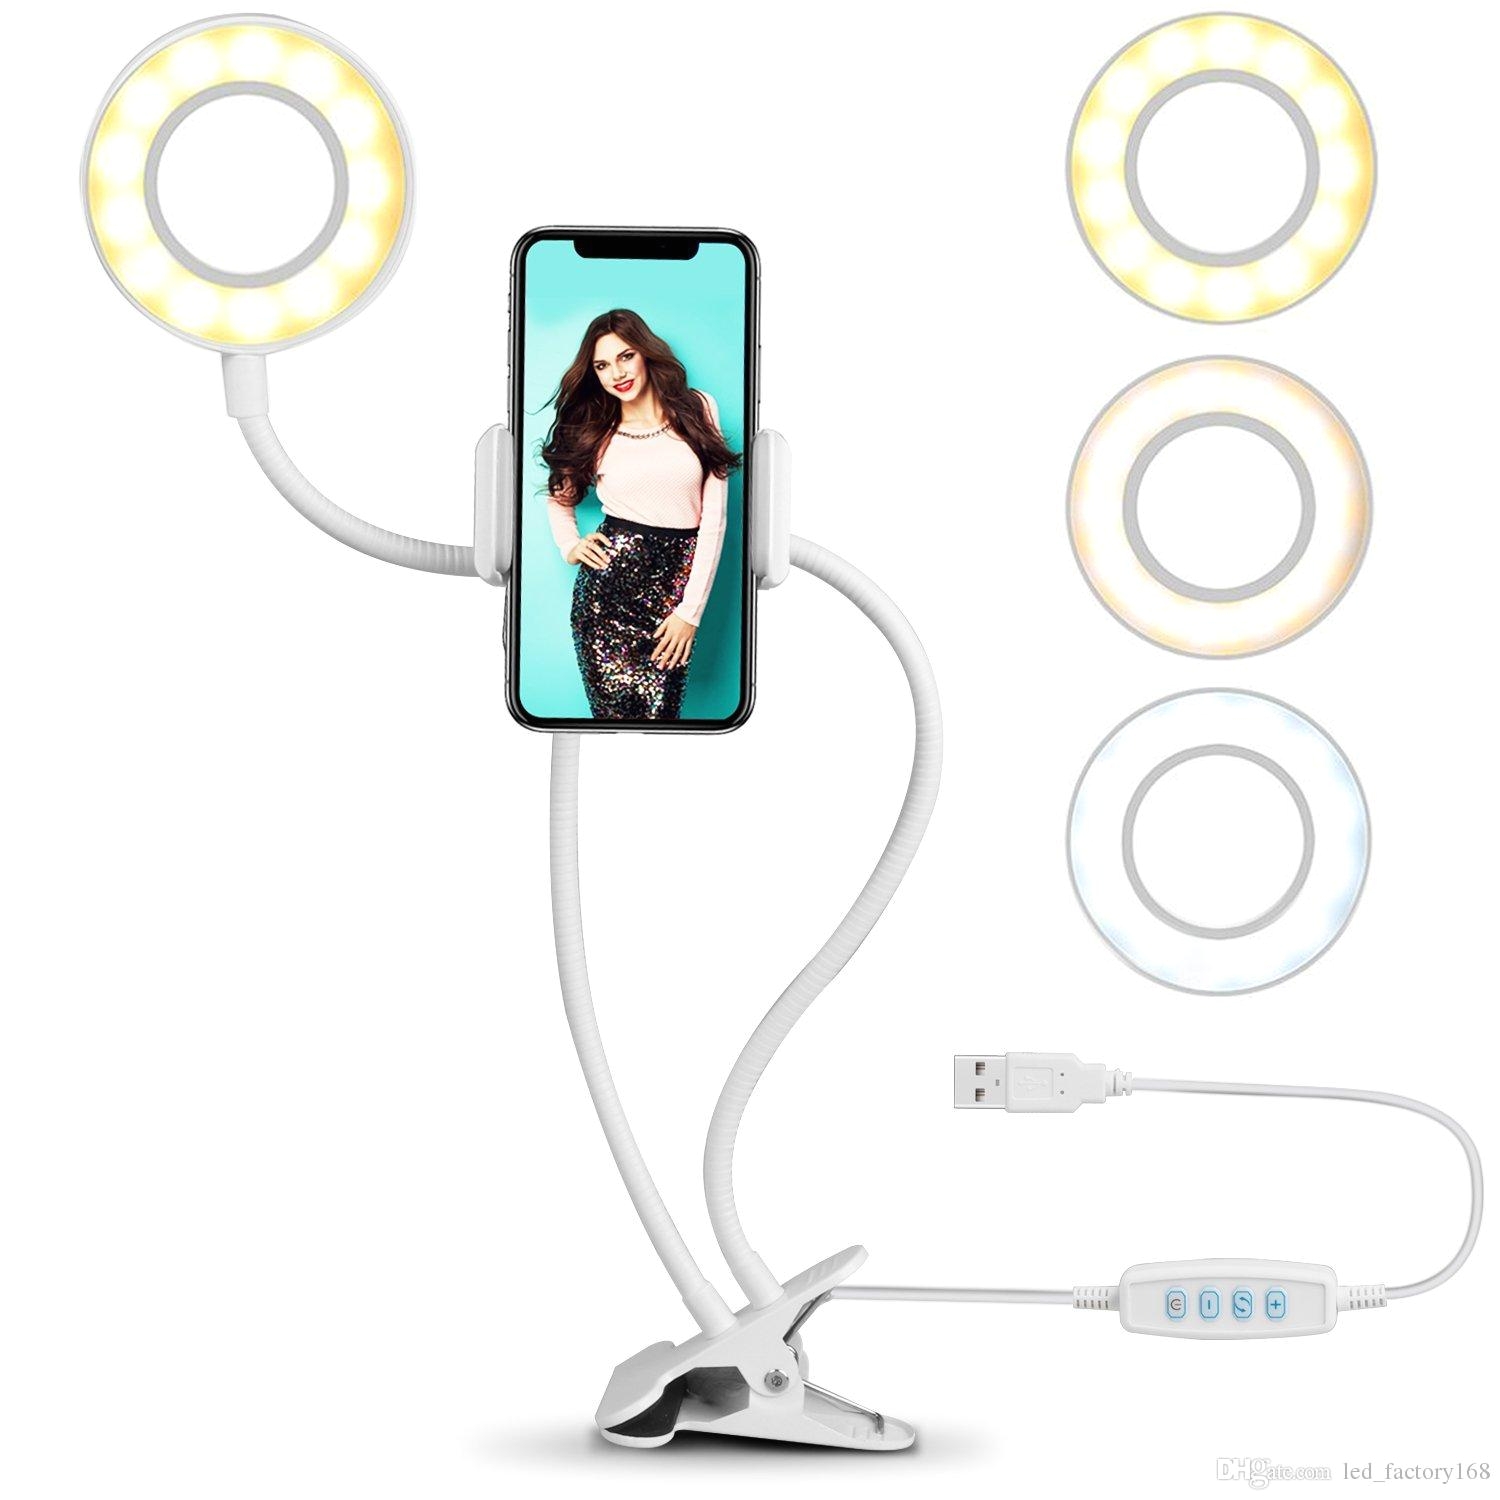 2018 ring light table lamps for cell phone holder with selfie ring light for live stream makeup video chat 3 light mode and 10 level brightness from